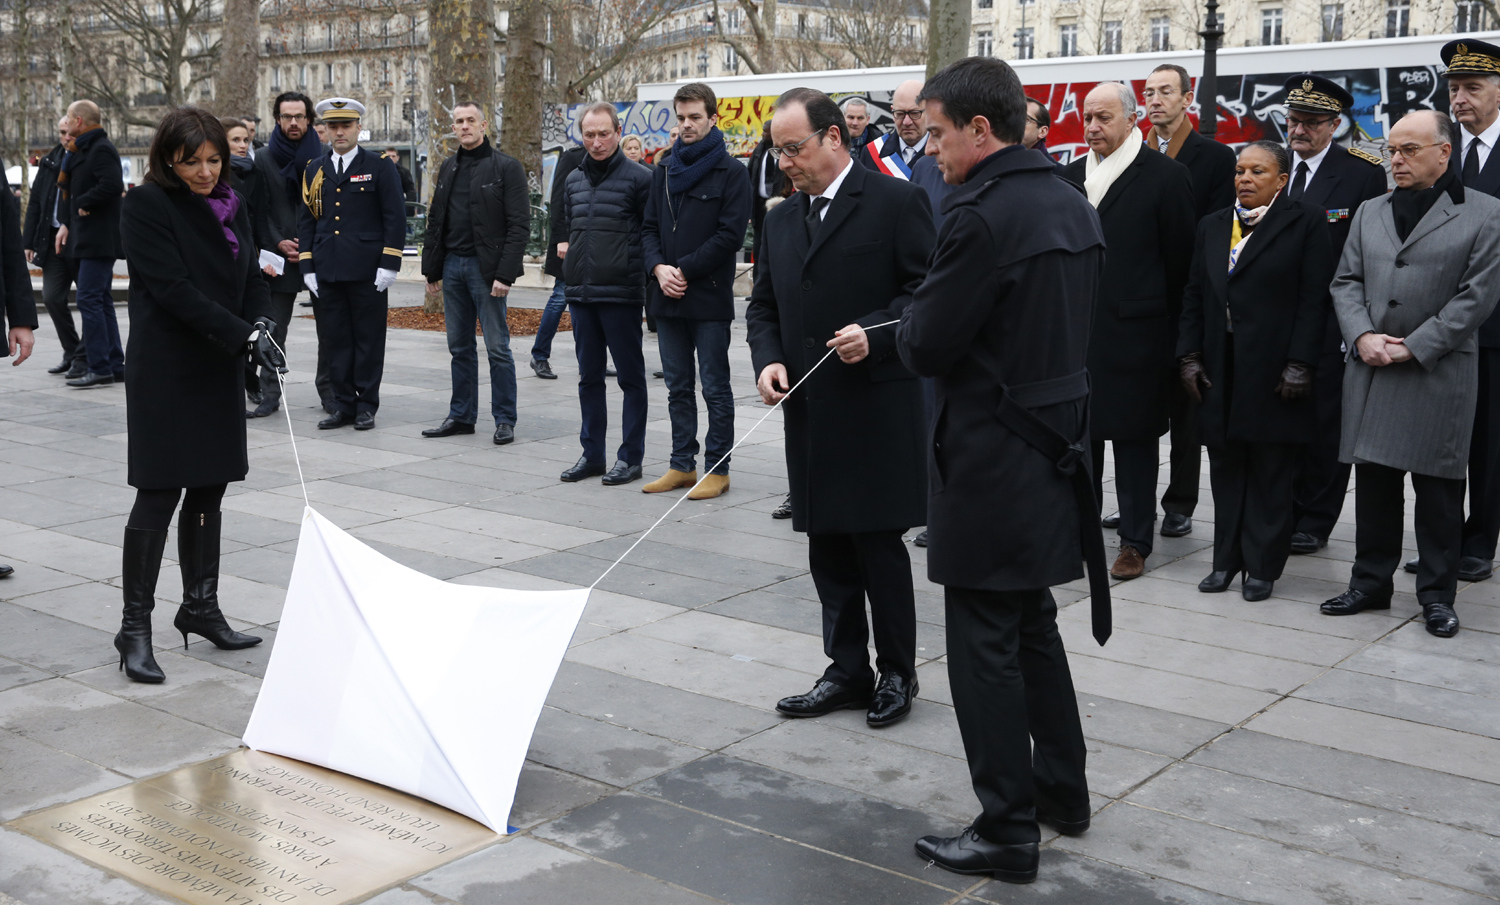 French President Francois Hollande (C), Prime Minister Manuel Valls (R) and Paris Mayor Anne Hidalgo (L) unveil a commemorative plaque during a ceremony held, on January 10, 2016 to mark a year since 1.6 million people thronged the French capital in a show of unity after attacks on the Charlie Hebdo newspaper and a Jewish supermarket. Just as it was last year, the vast Place de la Republique will be the focus of the gathering as people reiterate their support for freedom of expression and remember the other victims of what would become a year of jihadist outrages in France, culminating in the November 13 coordinated shootings and suicide bombings that killed 130 people and were claimed by the Islamic State (IS) group. / AFP / POOL / PHILIPPE WOJAZER